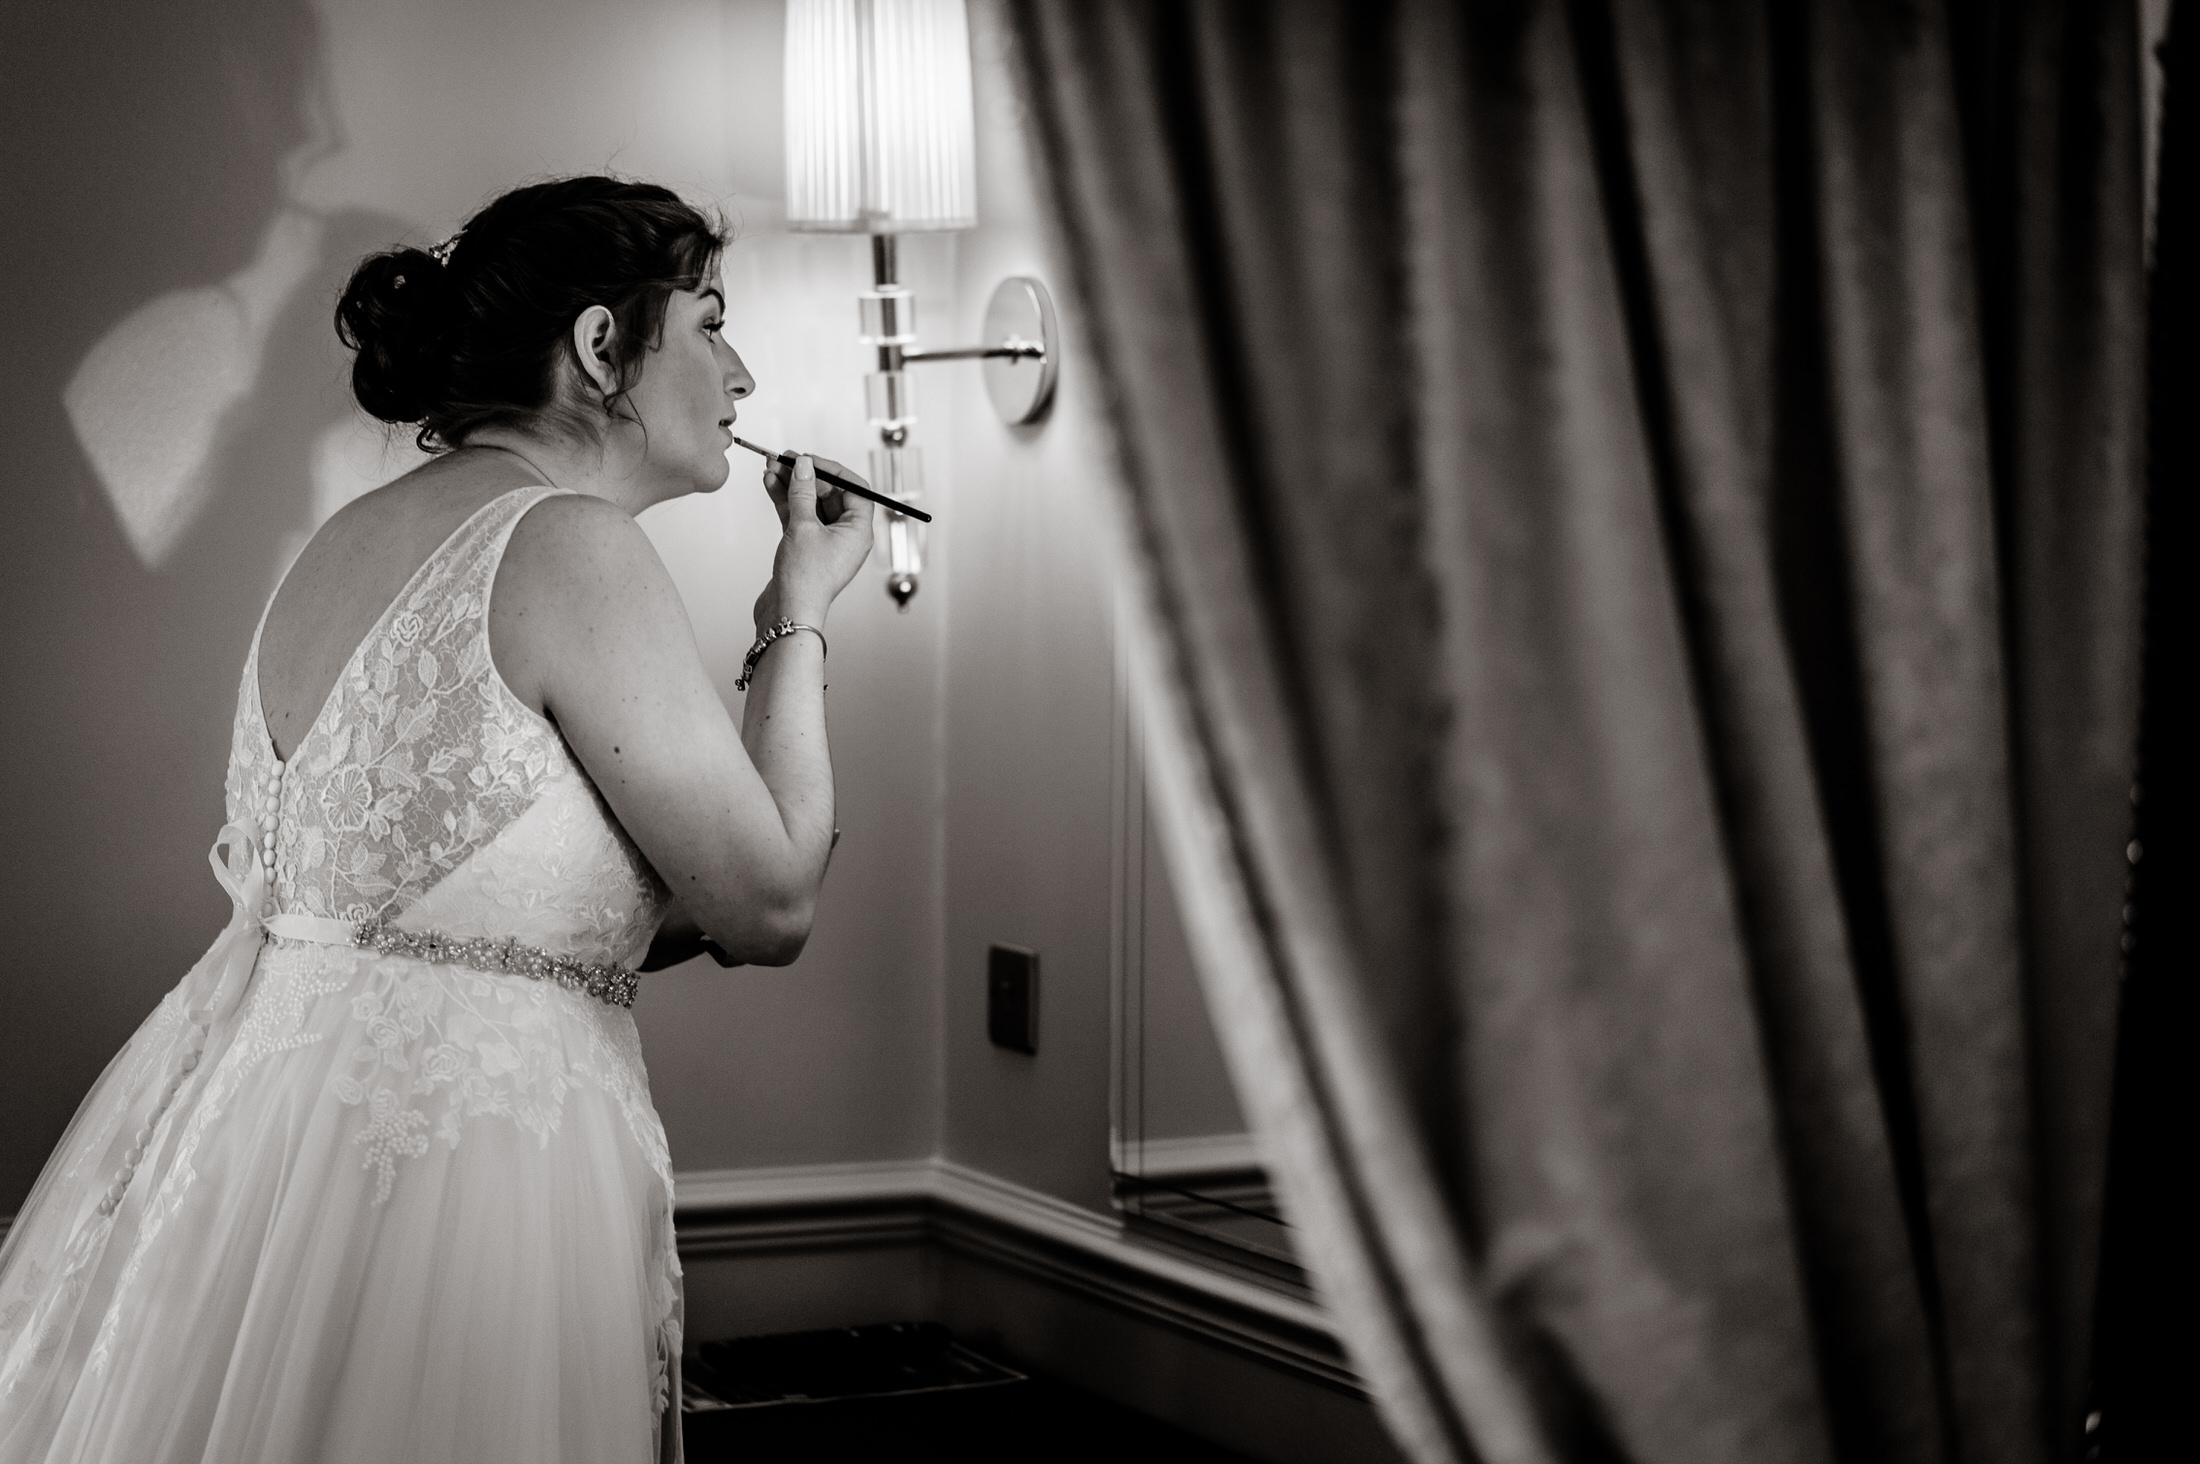 A bride is getting ready in front of a mirror at the Brackenborough Hotel for her wedding.